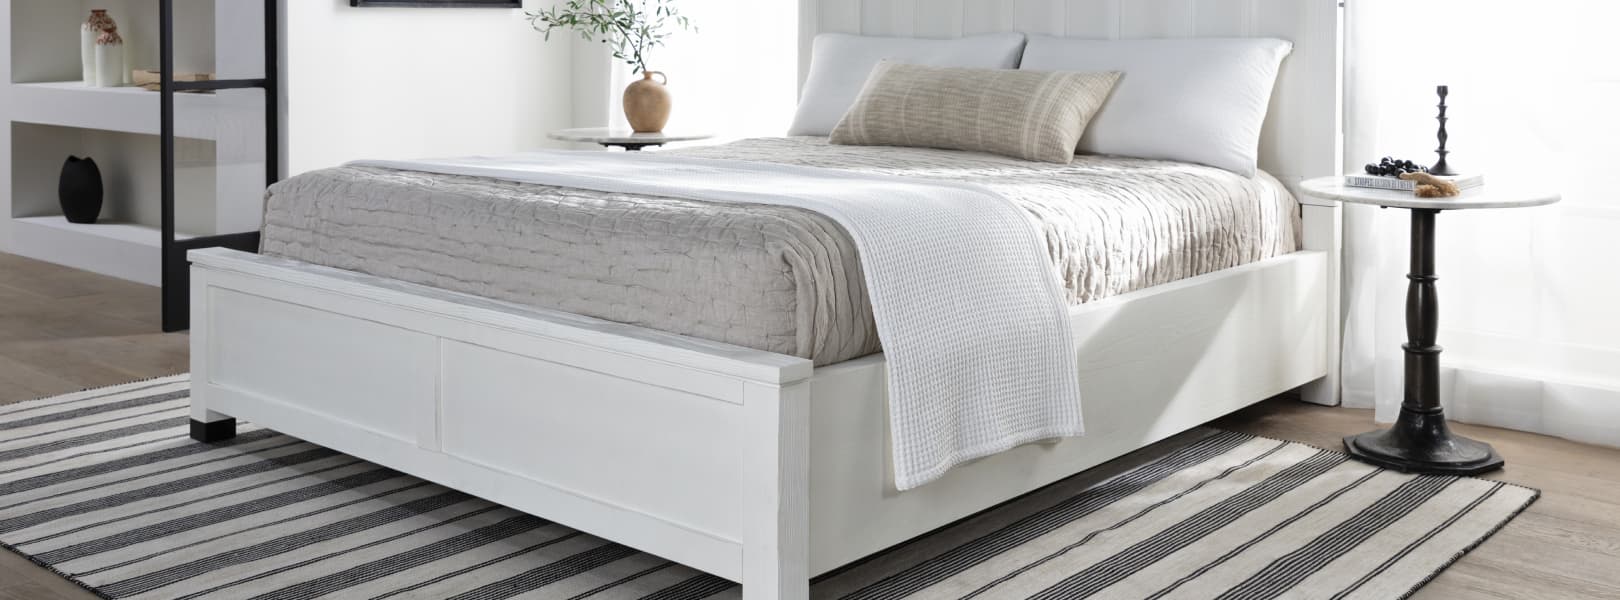 how to choose bedding for a king size bed